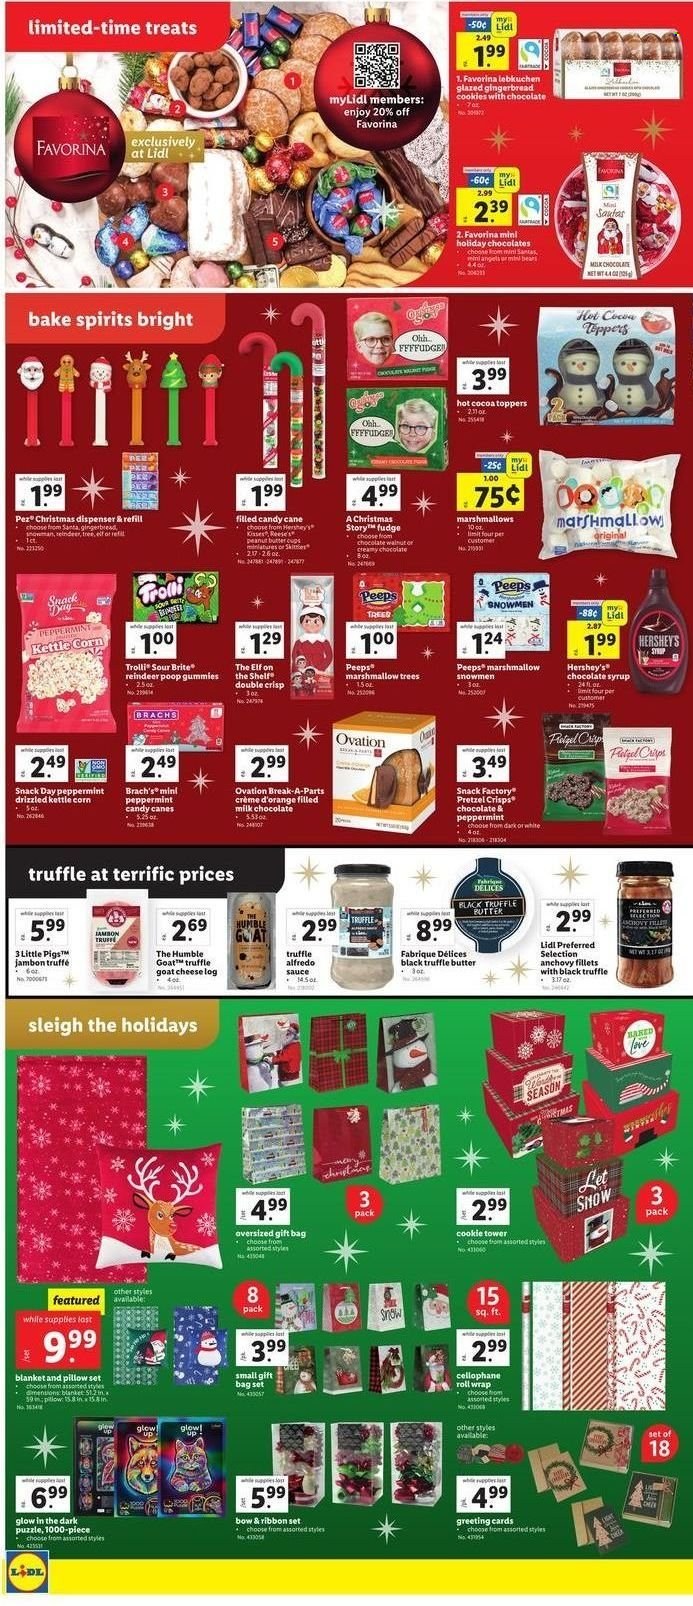 thumbnail - Lidl Flyer - 11/30/2022 - 12/06/2022 - Sales products - gingerbread, oranges, sauce, Alfredo sauce, goat cheese, cheese, Reese's, Hershey's, cookies, fudge, gingerbread cookies, marshmallows, milk chocolate, snack, candy cane, Trolli, Santa, peanut butter cups, Peeps, kettle corn, pretzel crisps, anchovies, chocolate syrup, syrup, hot cocoa, Brite, dispenser, gift bag, pillow, reindeer, puzzle. Page 2.